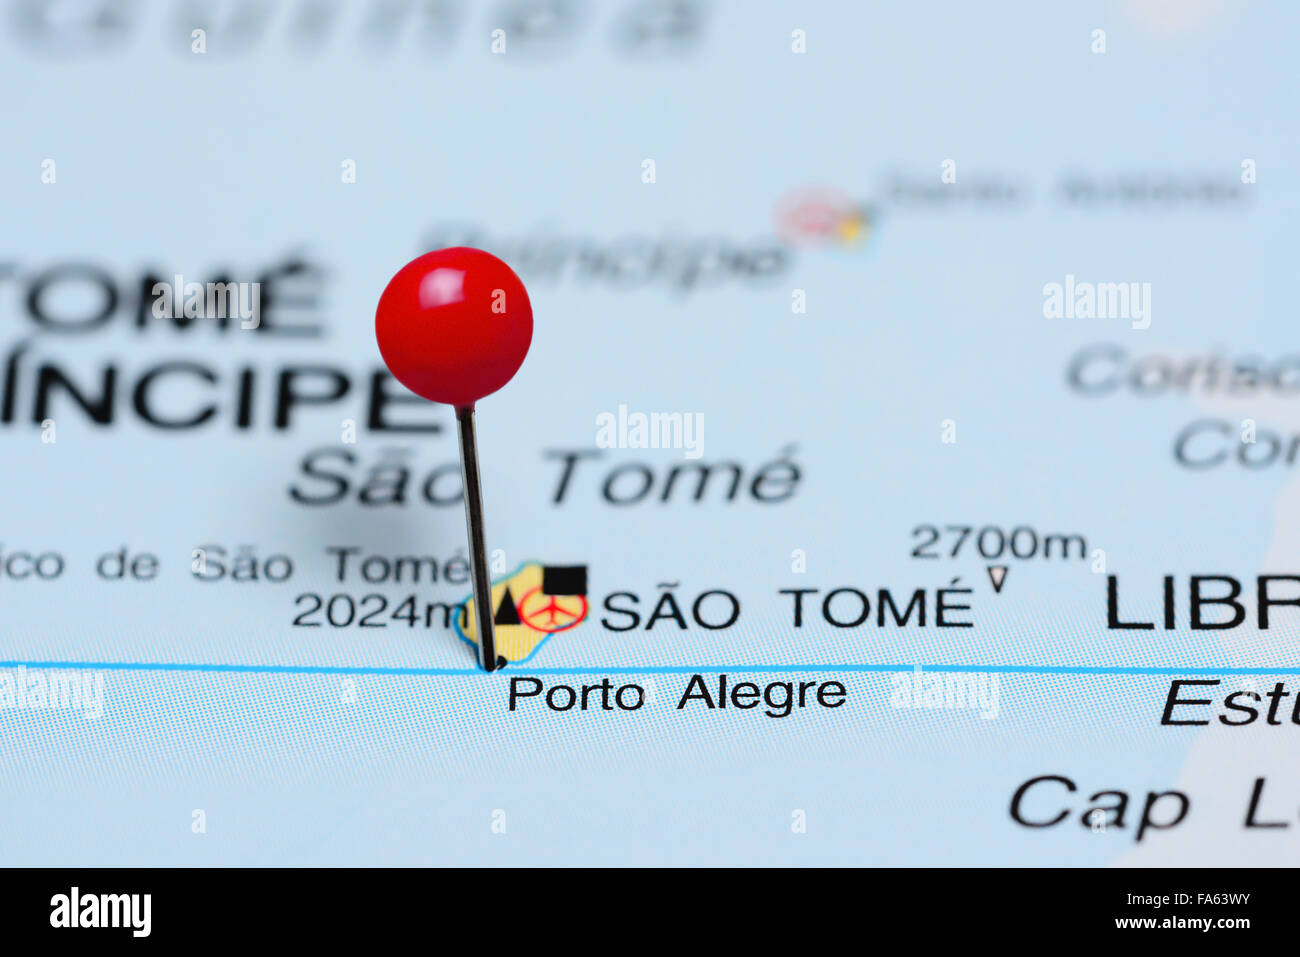 Porto Alegre pinned on a map of Africa Stock Photo